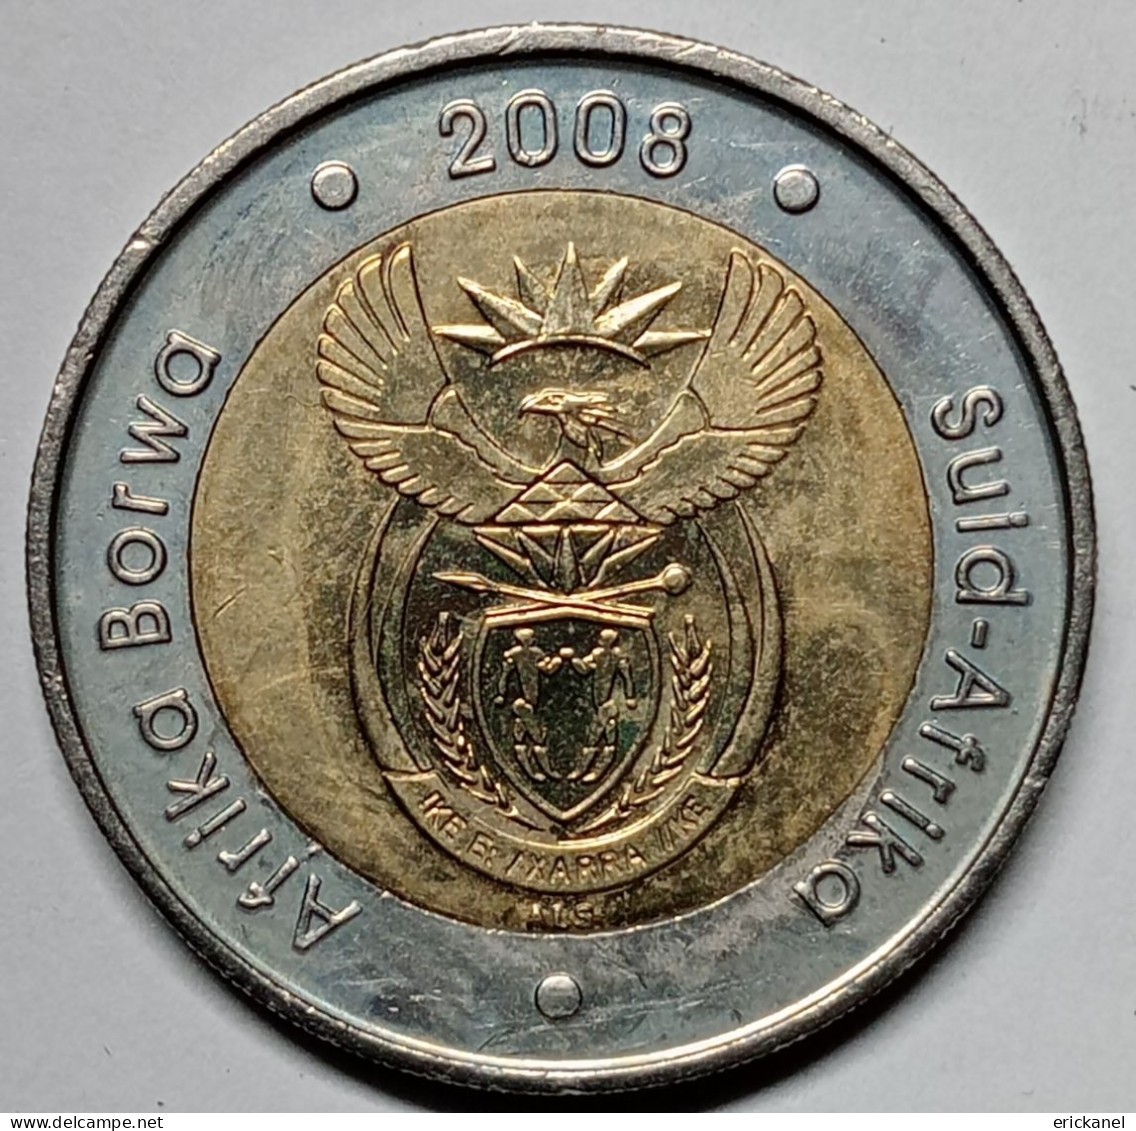 2008 SOUTH AFRICA NELSON MANDELA 90th BIRTHDAY 5 RAND - UNC - South Africa